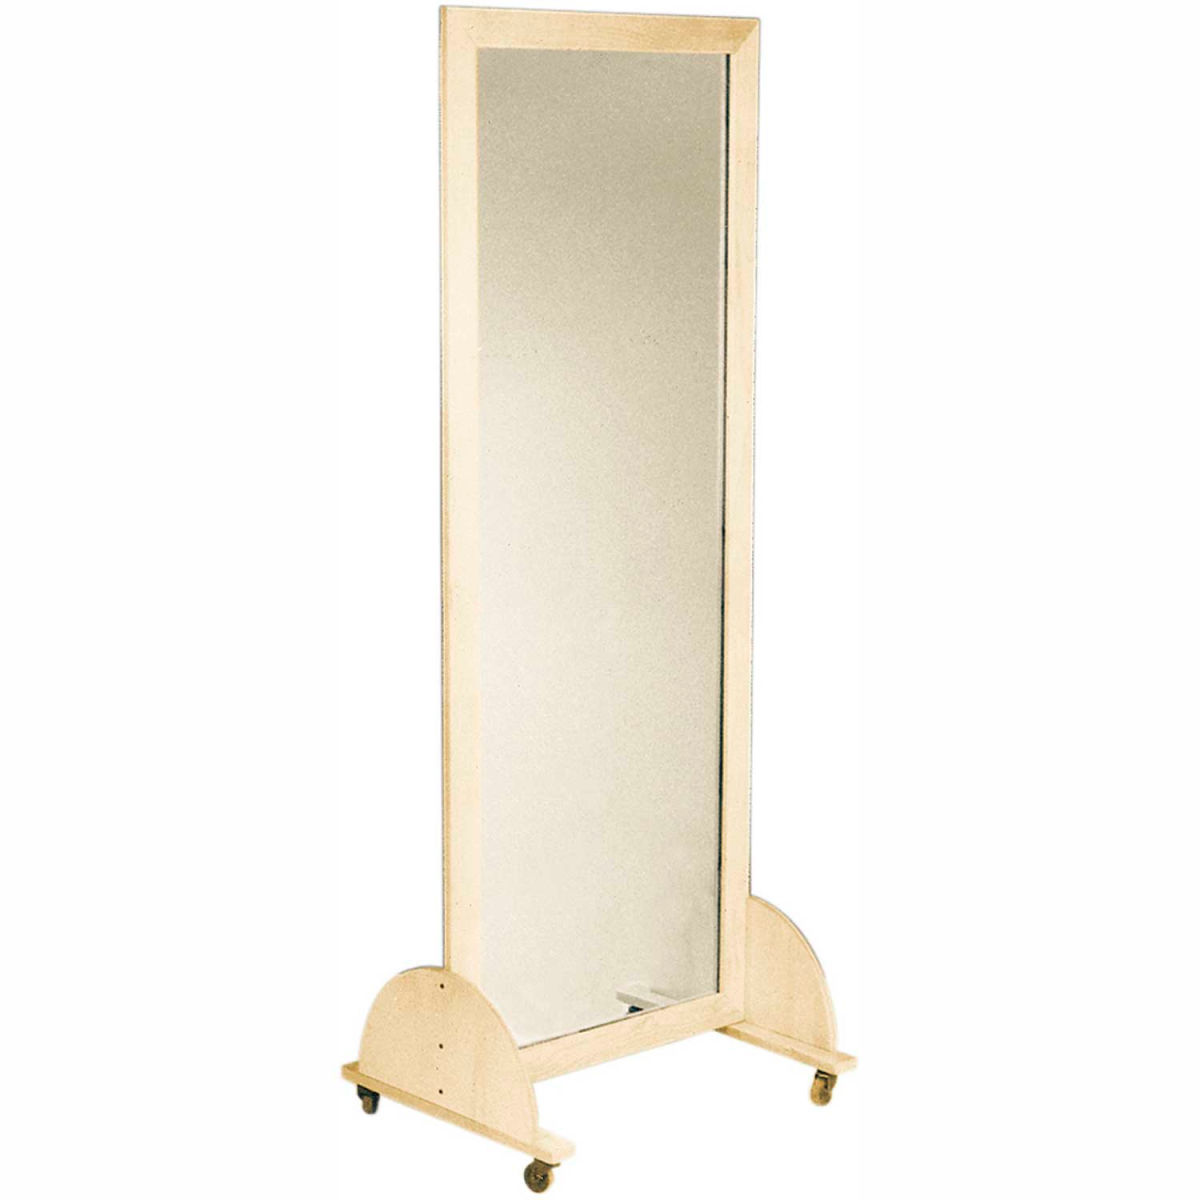 Picture of Fabrication Enterprises B2140454 Vertical Plate Glass Mirror with Mobile Caster Base - 22 x 60 in.